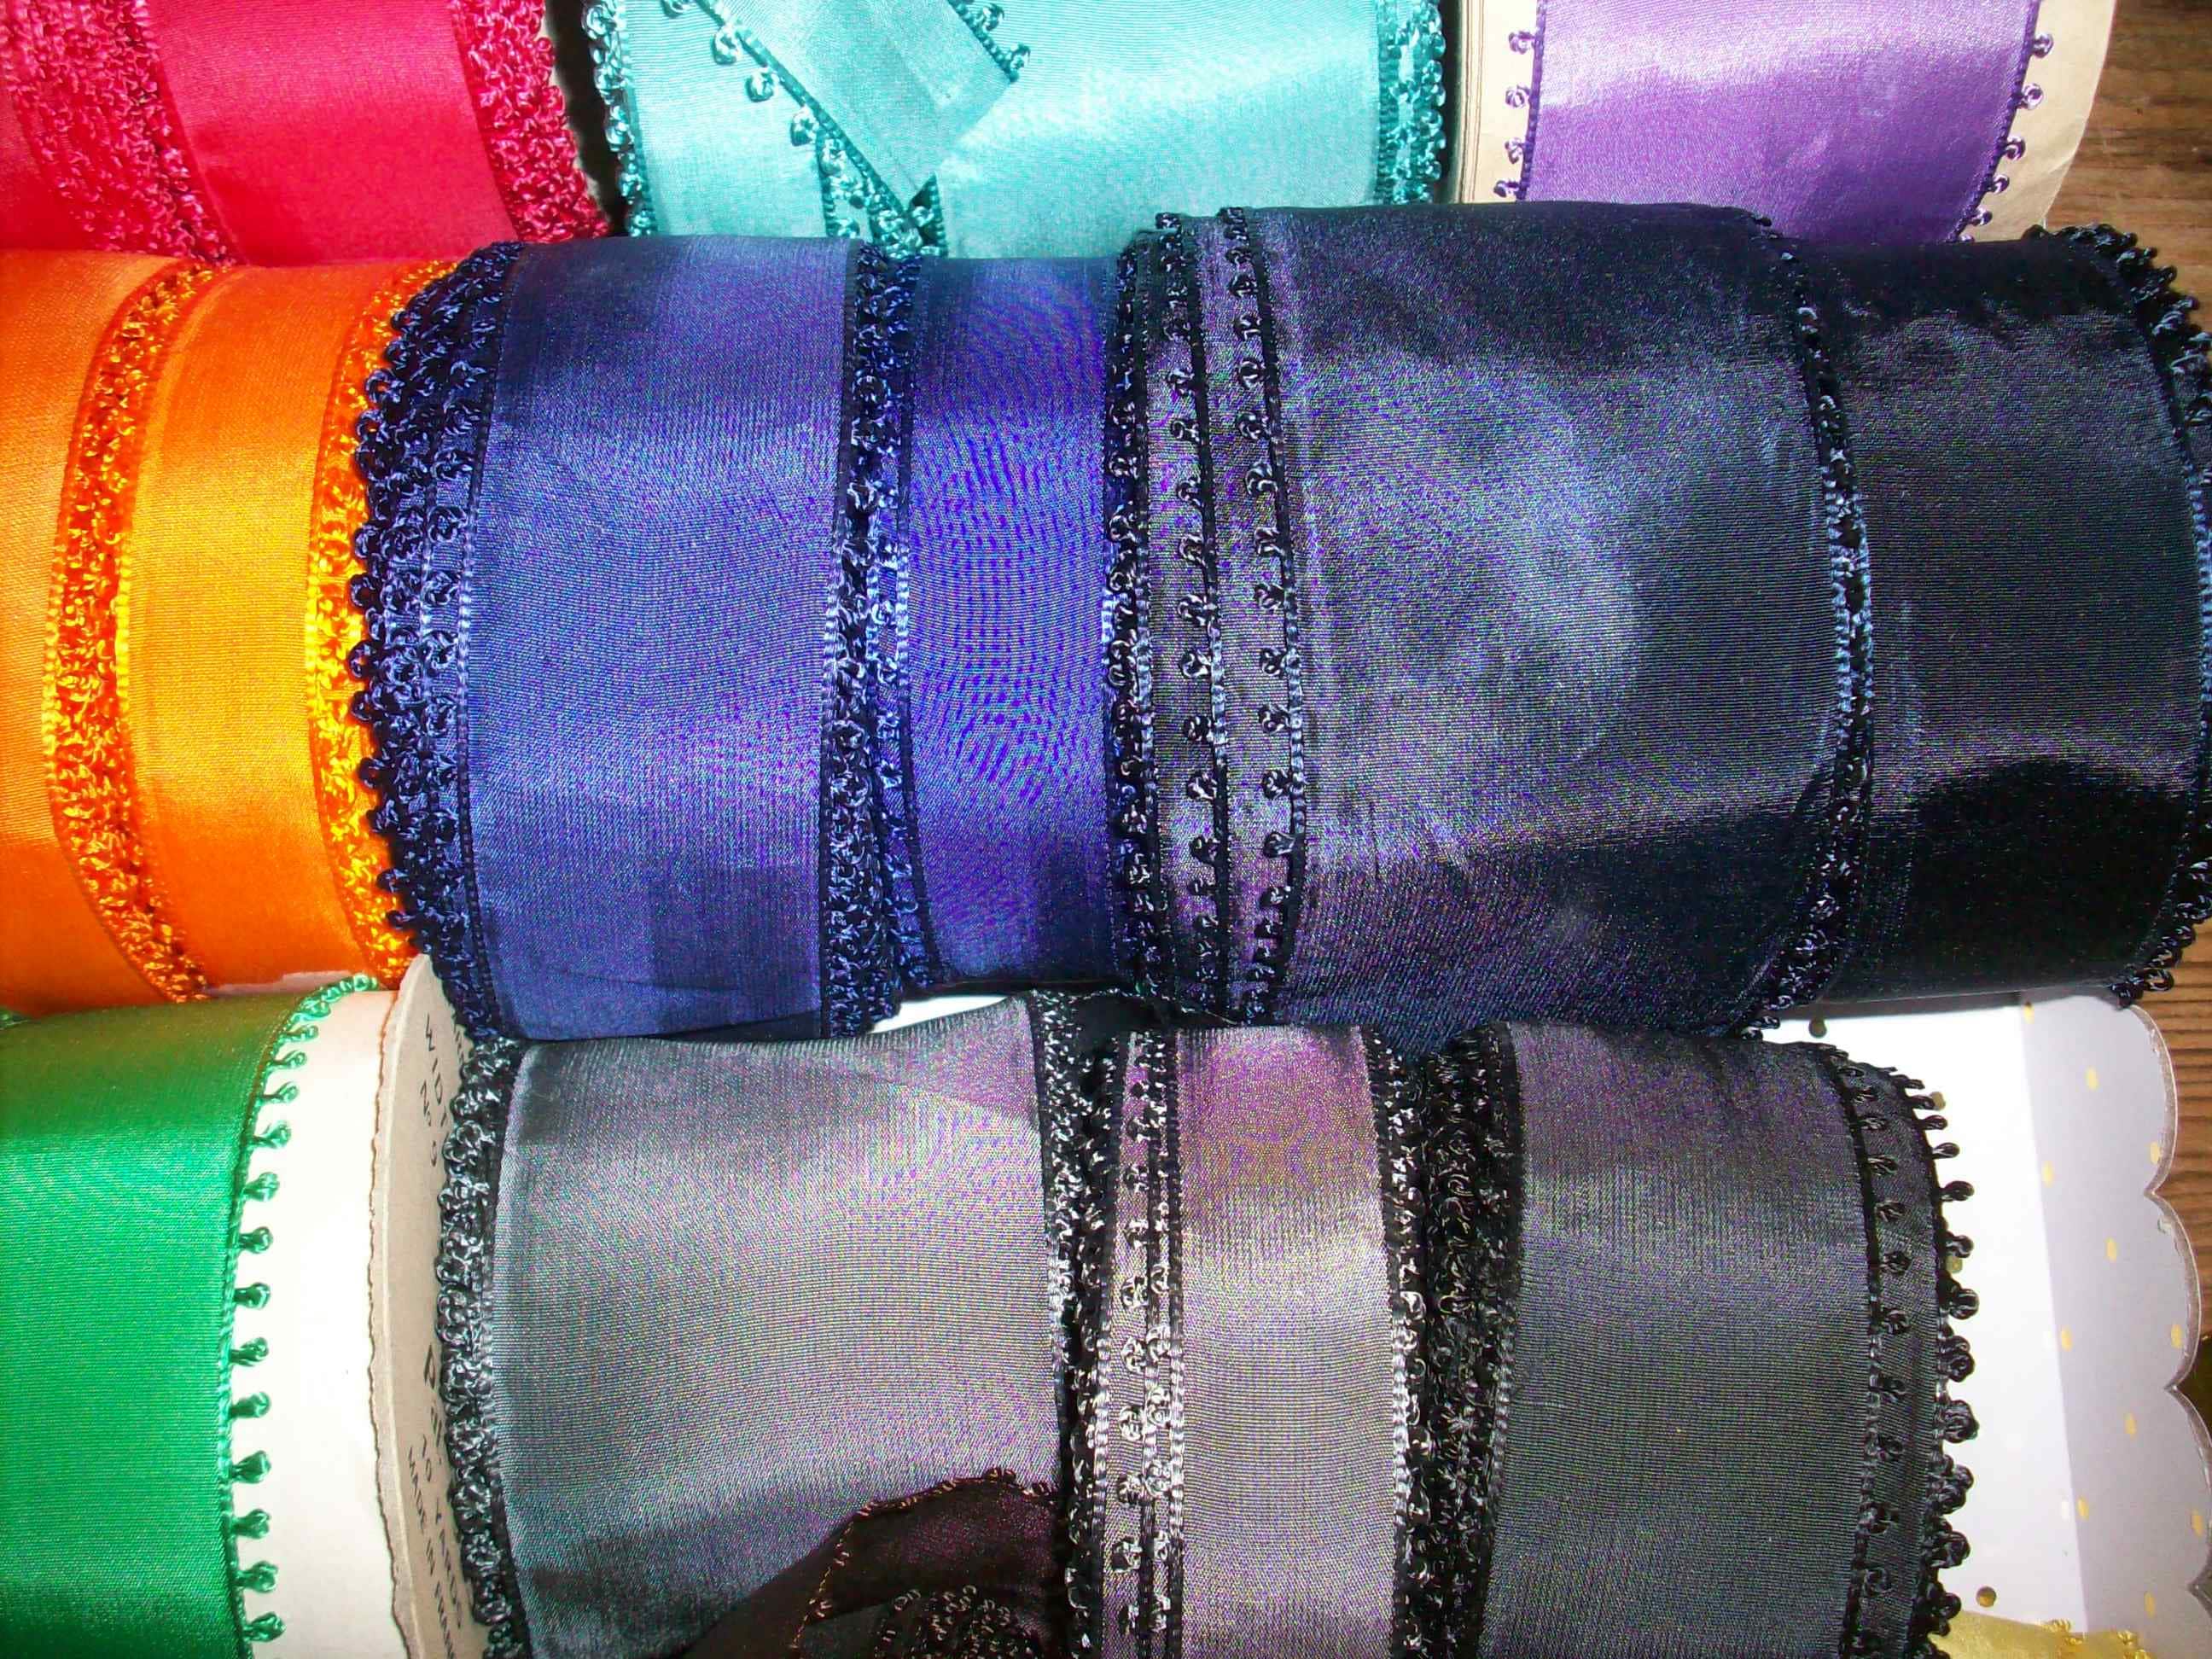 Outdoor Velvet Wired Ribbon By the Roll 1.5 x 10 Yards RL195424